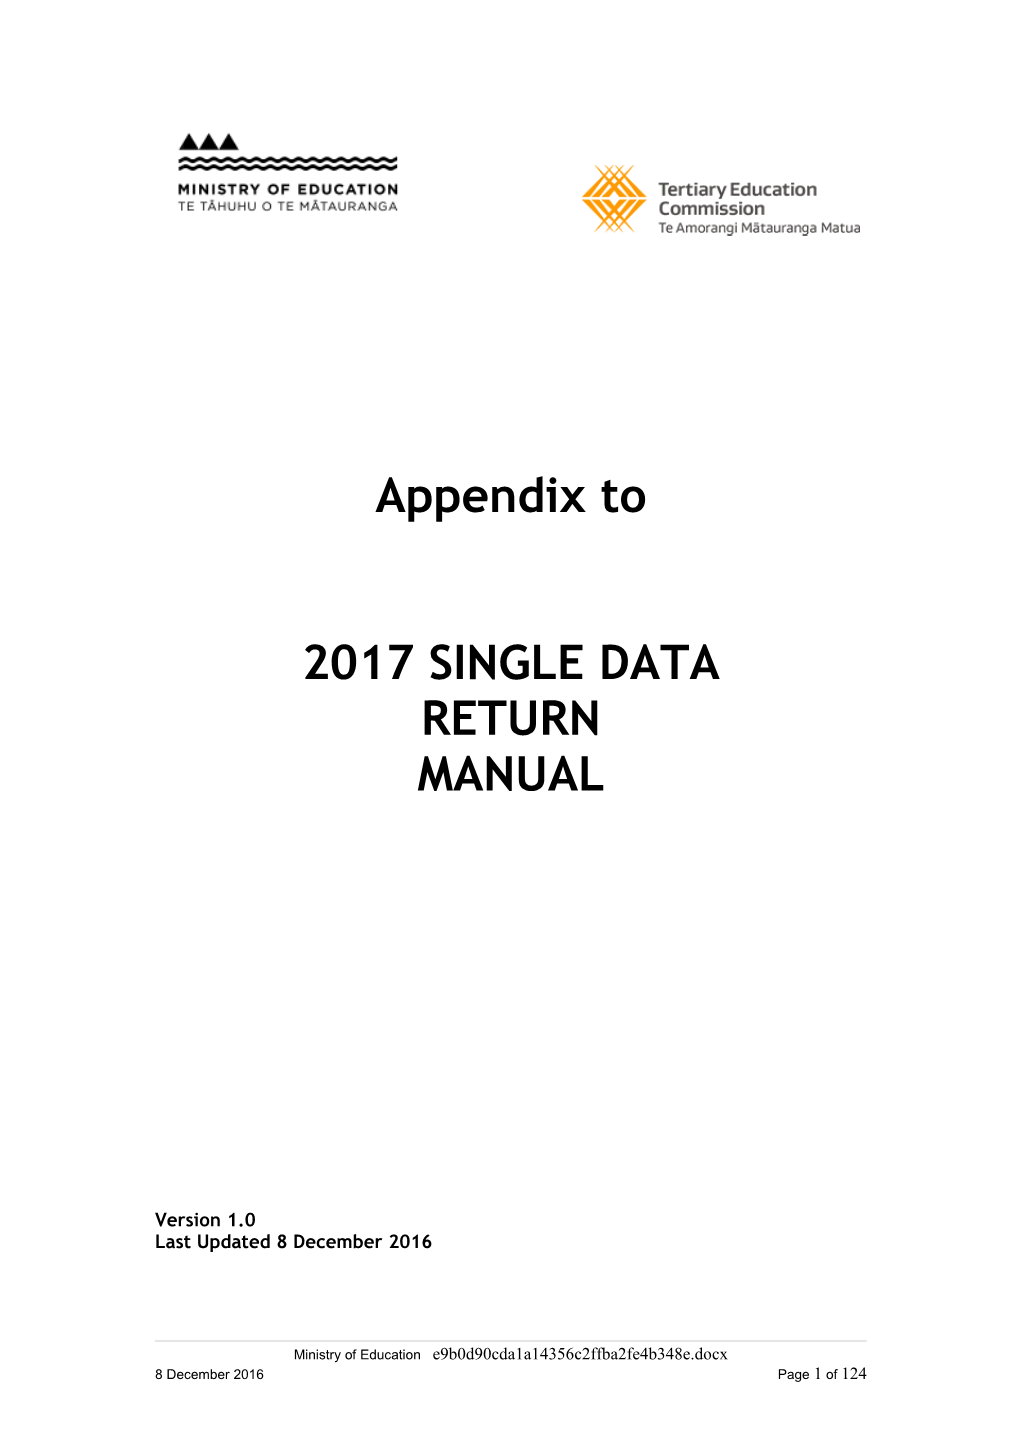 Ministry of Education - Single Data Return Manual Appendices 2017